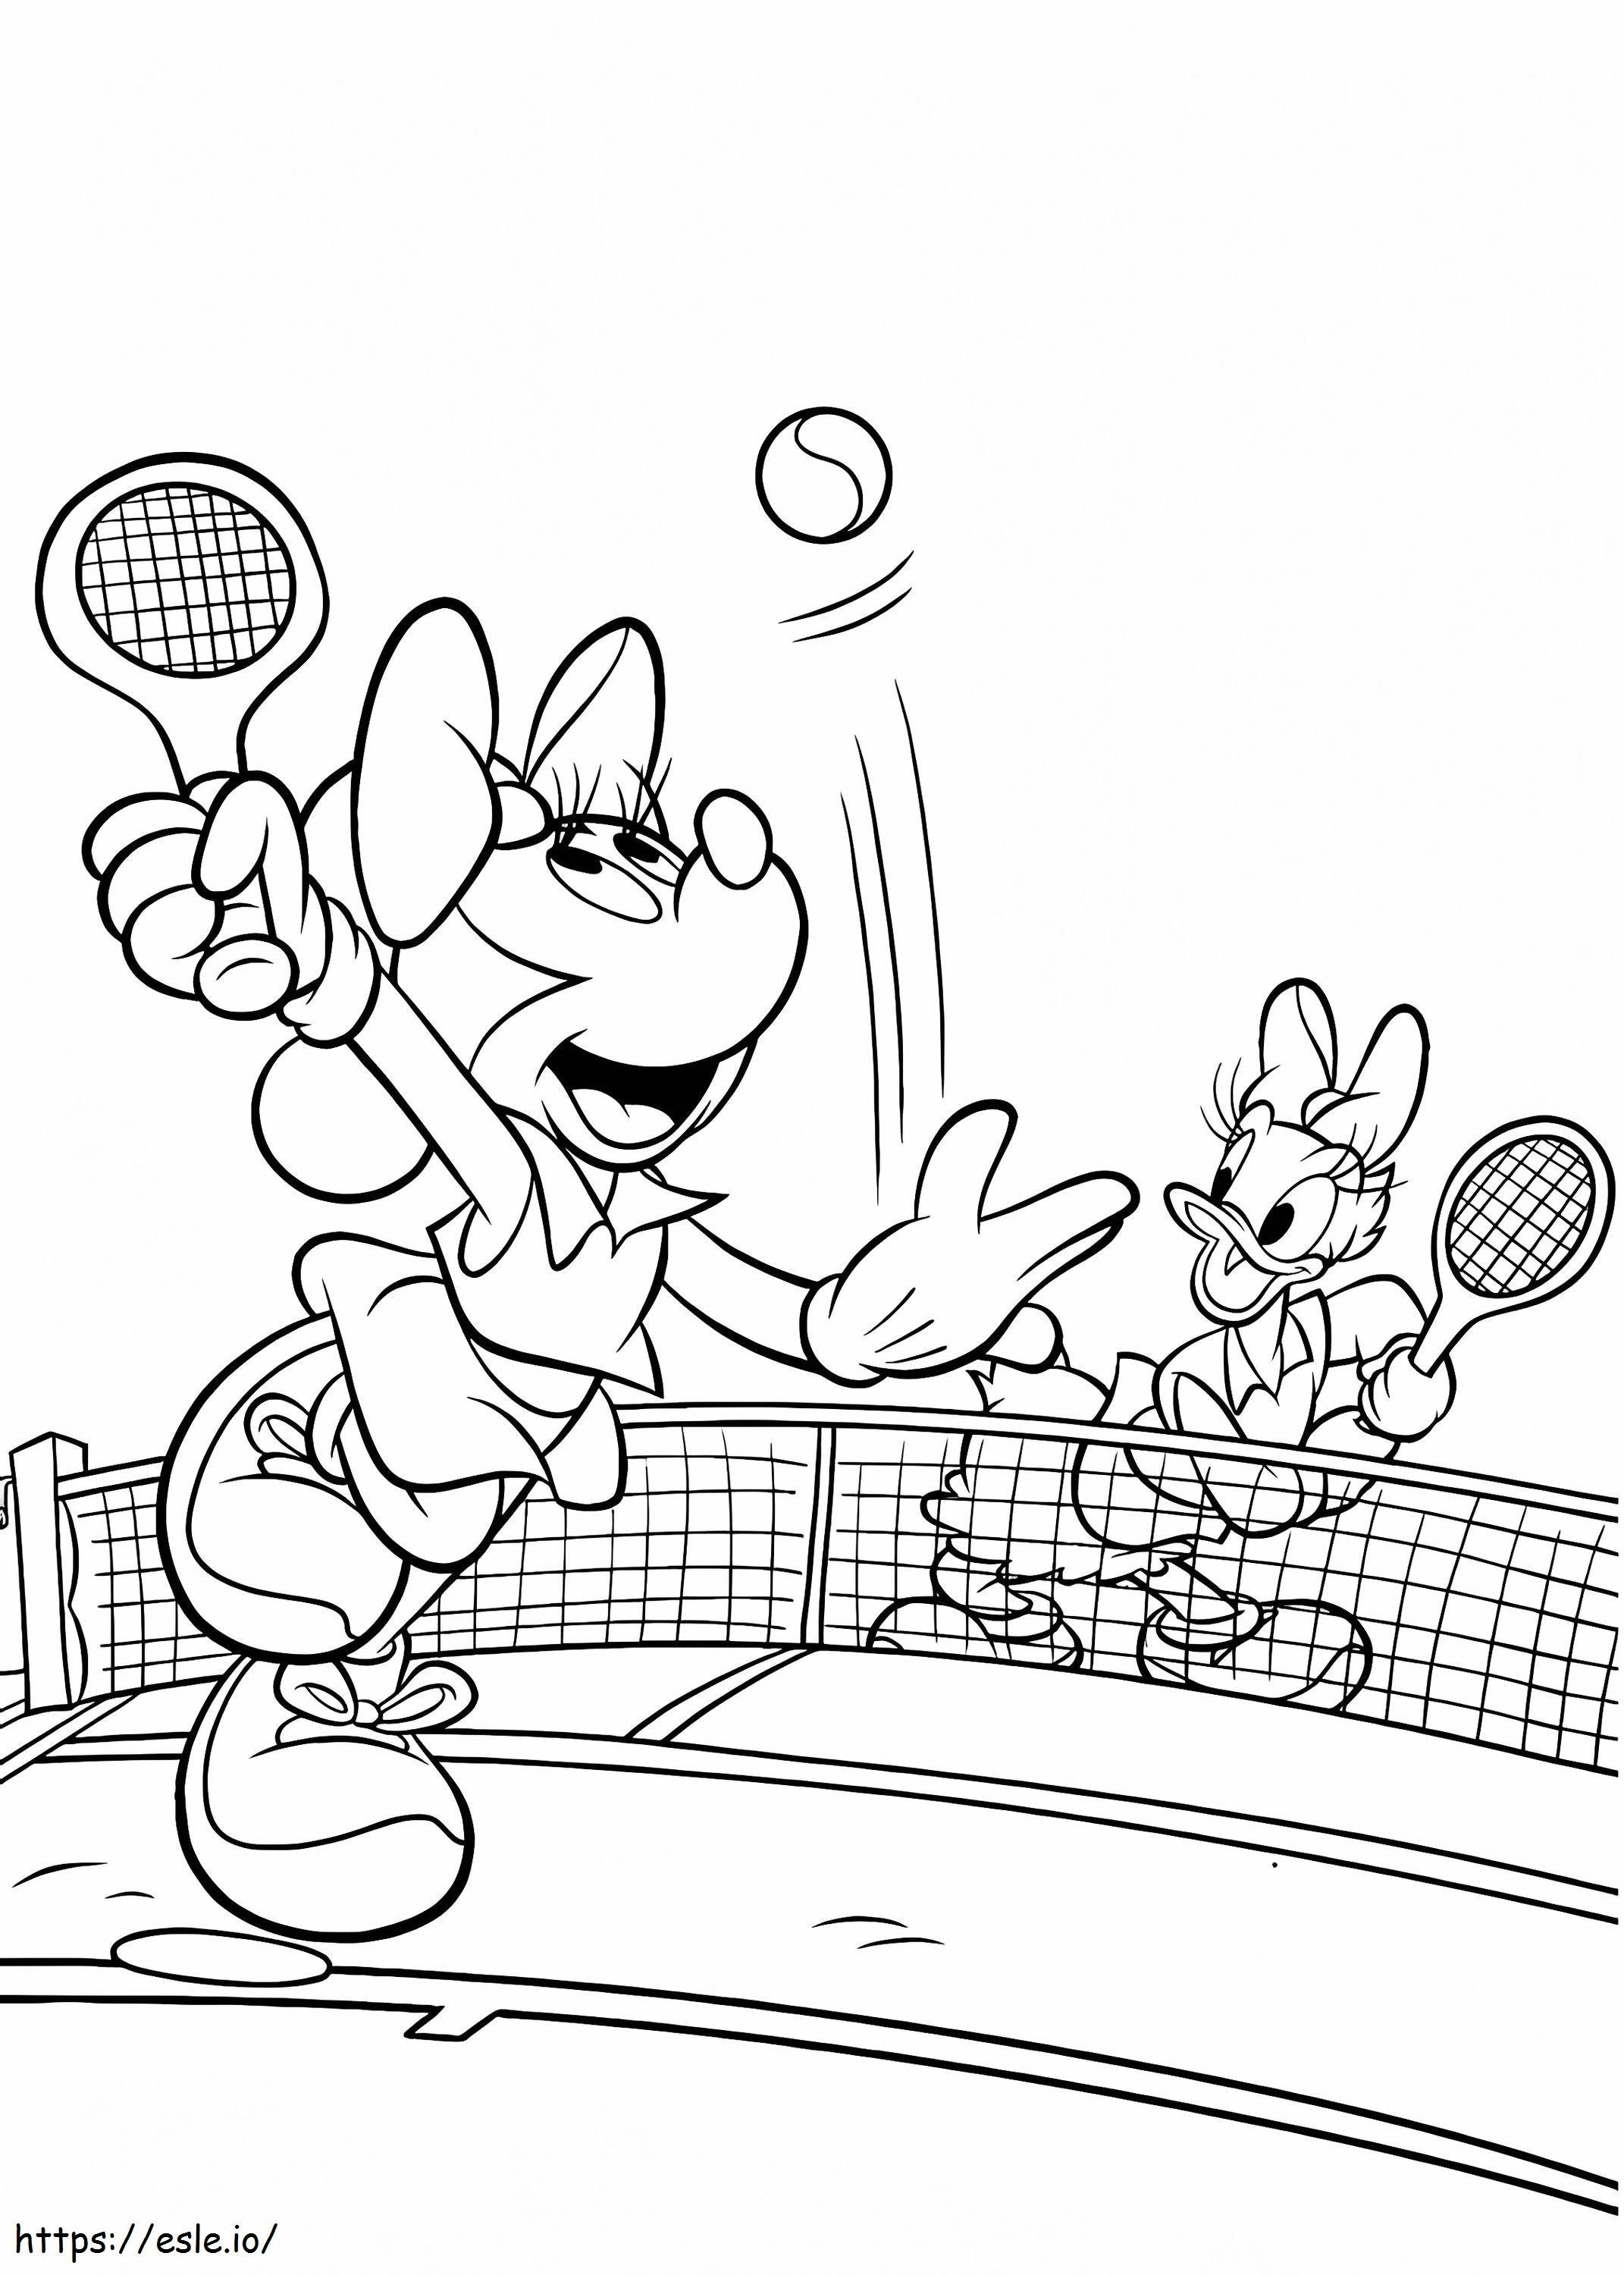 Minnie And Daisy Playing Tennis A4 coloring page